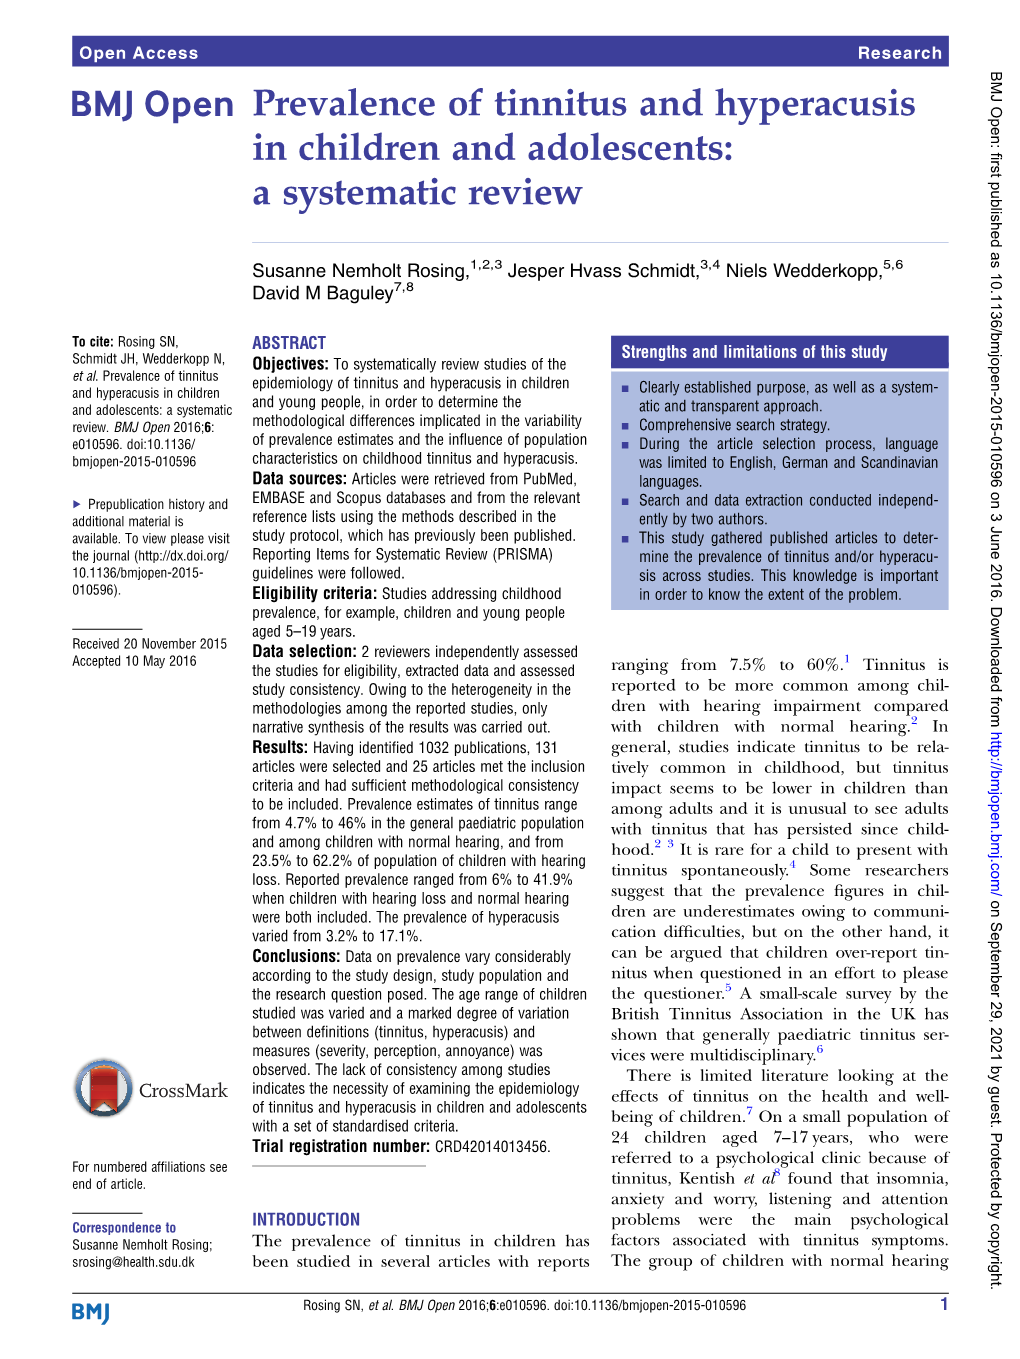 Prevalence of Tinnitus and Hyperacusis in Children and Adolescents: a Systematic Review